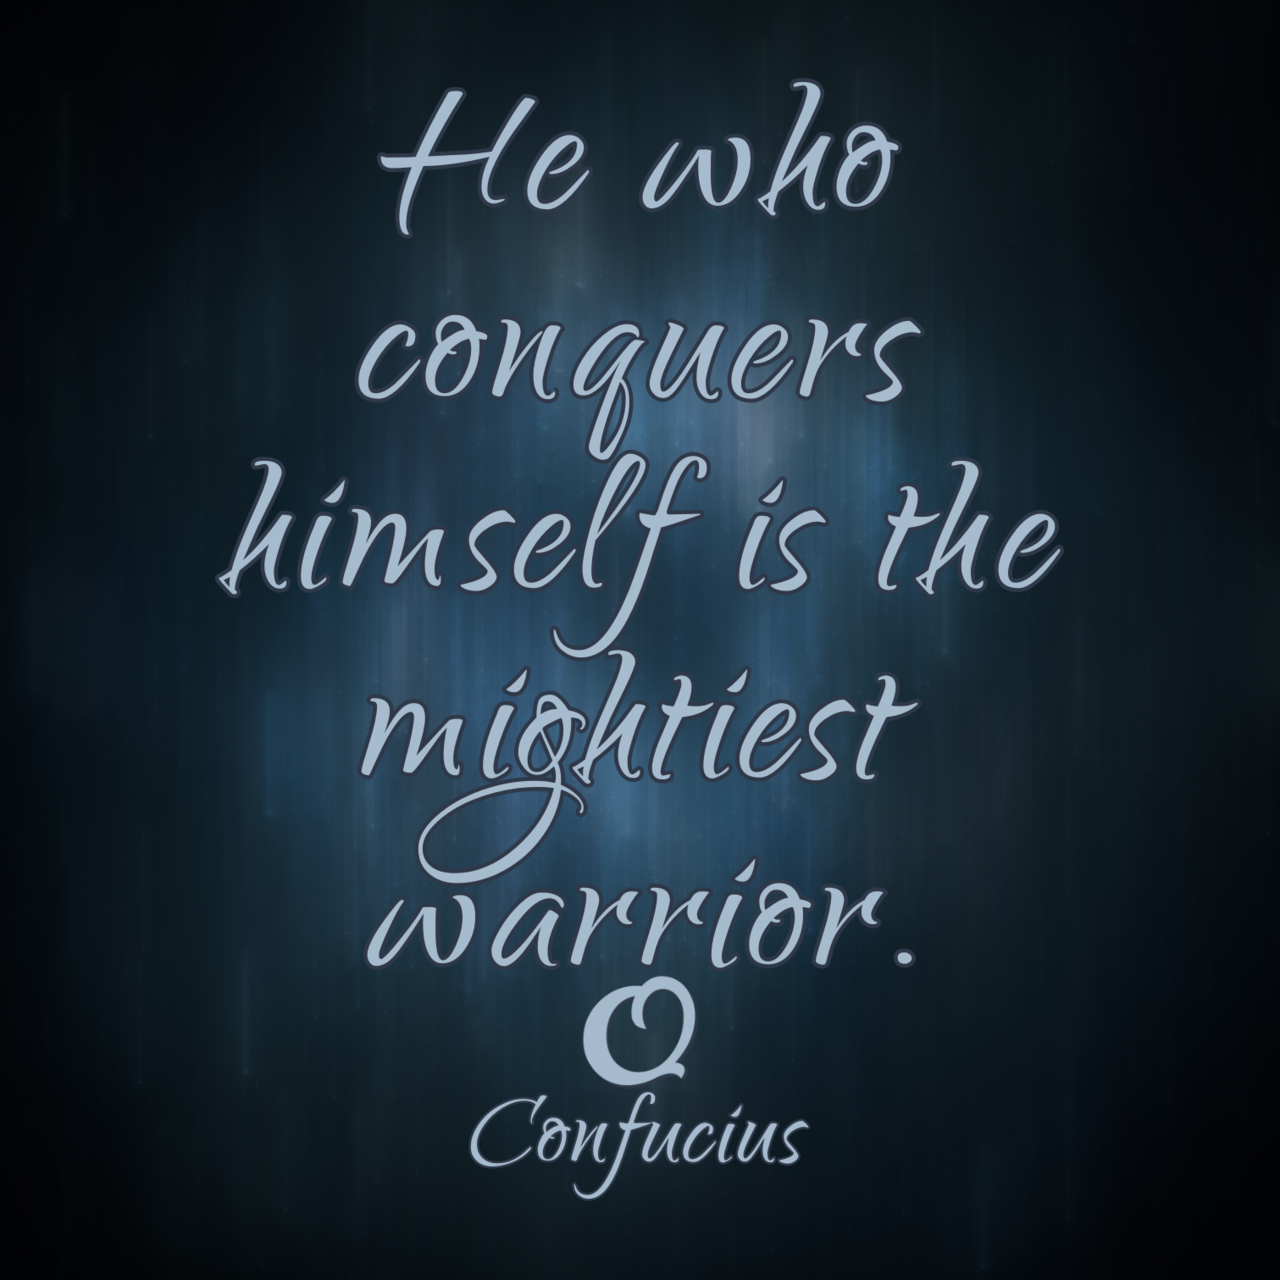 Confucius “He who conquers himself is the mightiest warrior.”